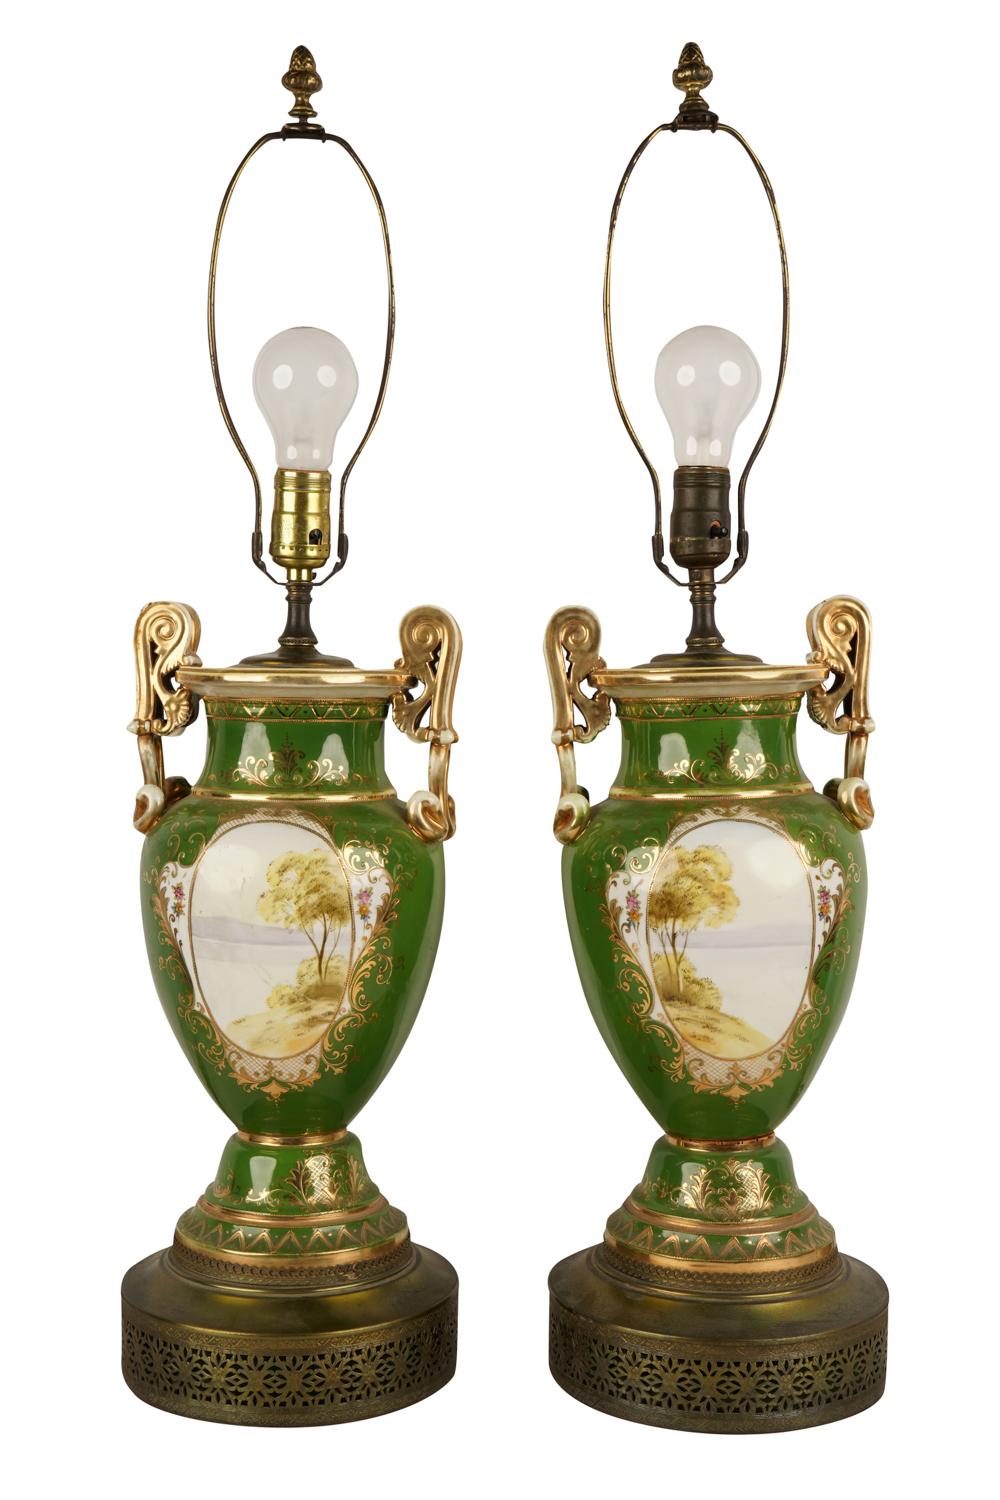 PAIR OF SEVRES-STYLE PORCELAIN